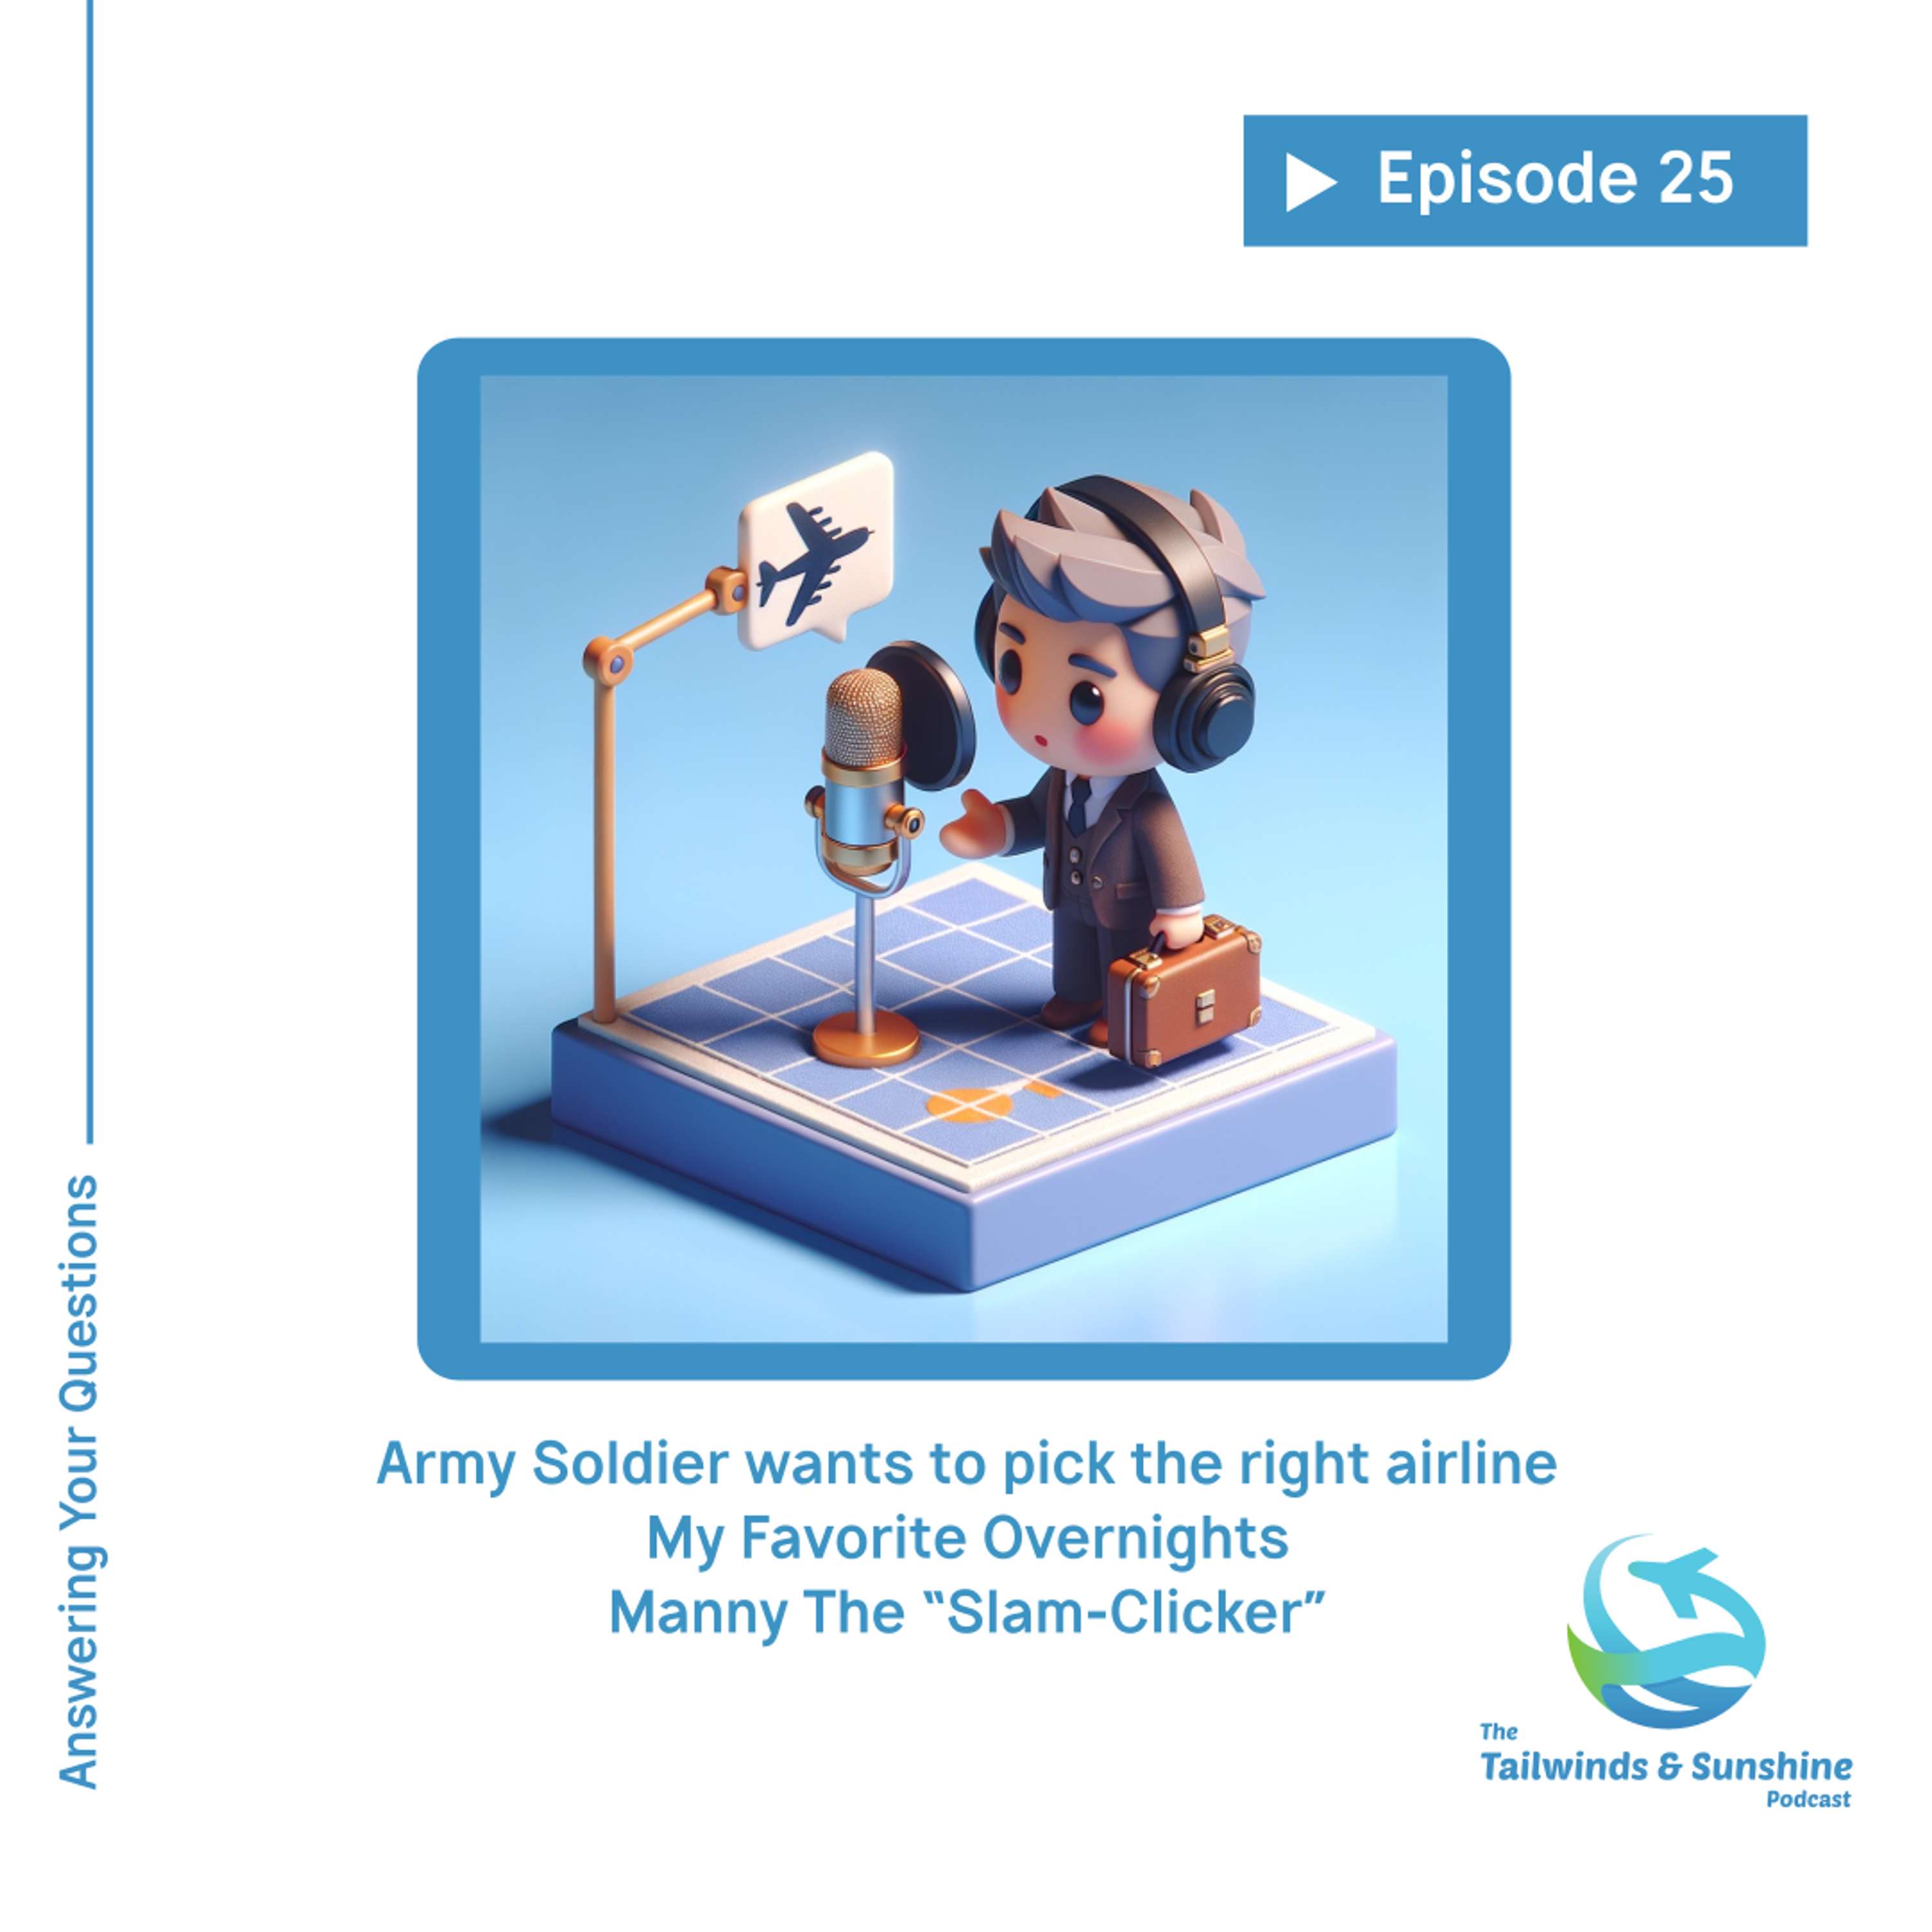 Answering Your Questions | Army Soldier wants to pick the right airline | Favorite Overnights | Manny the Slam-Clicker?